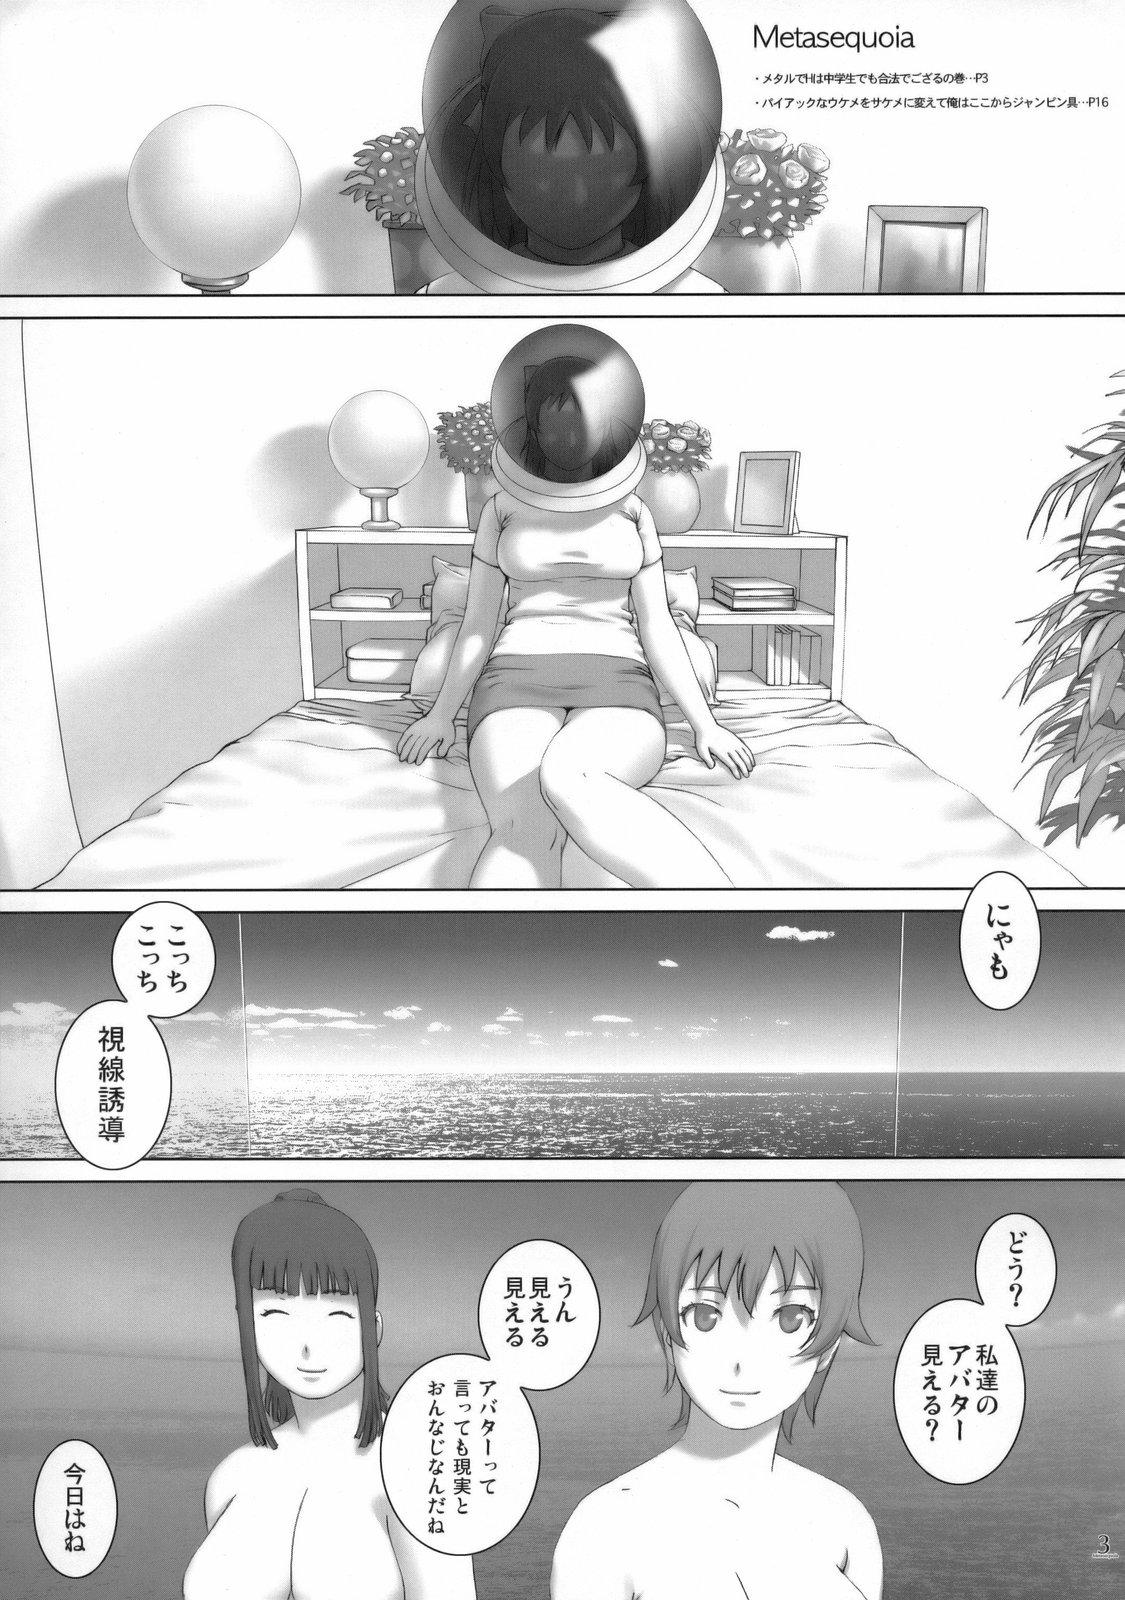 Straight Metasequoia - Real drive Master - Page 2